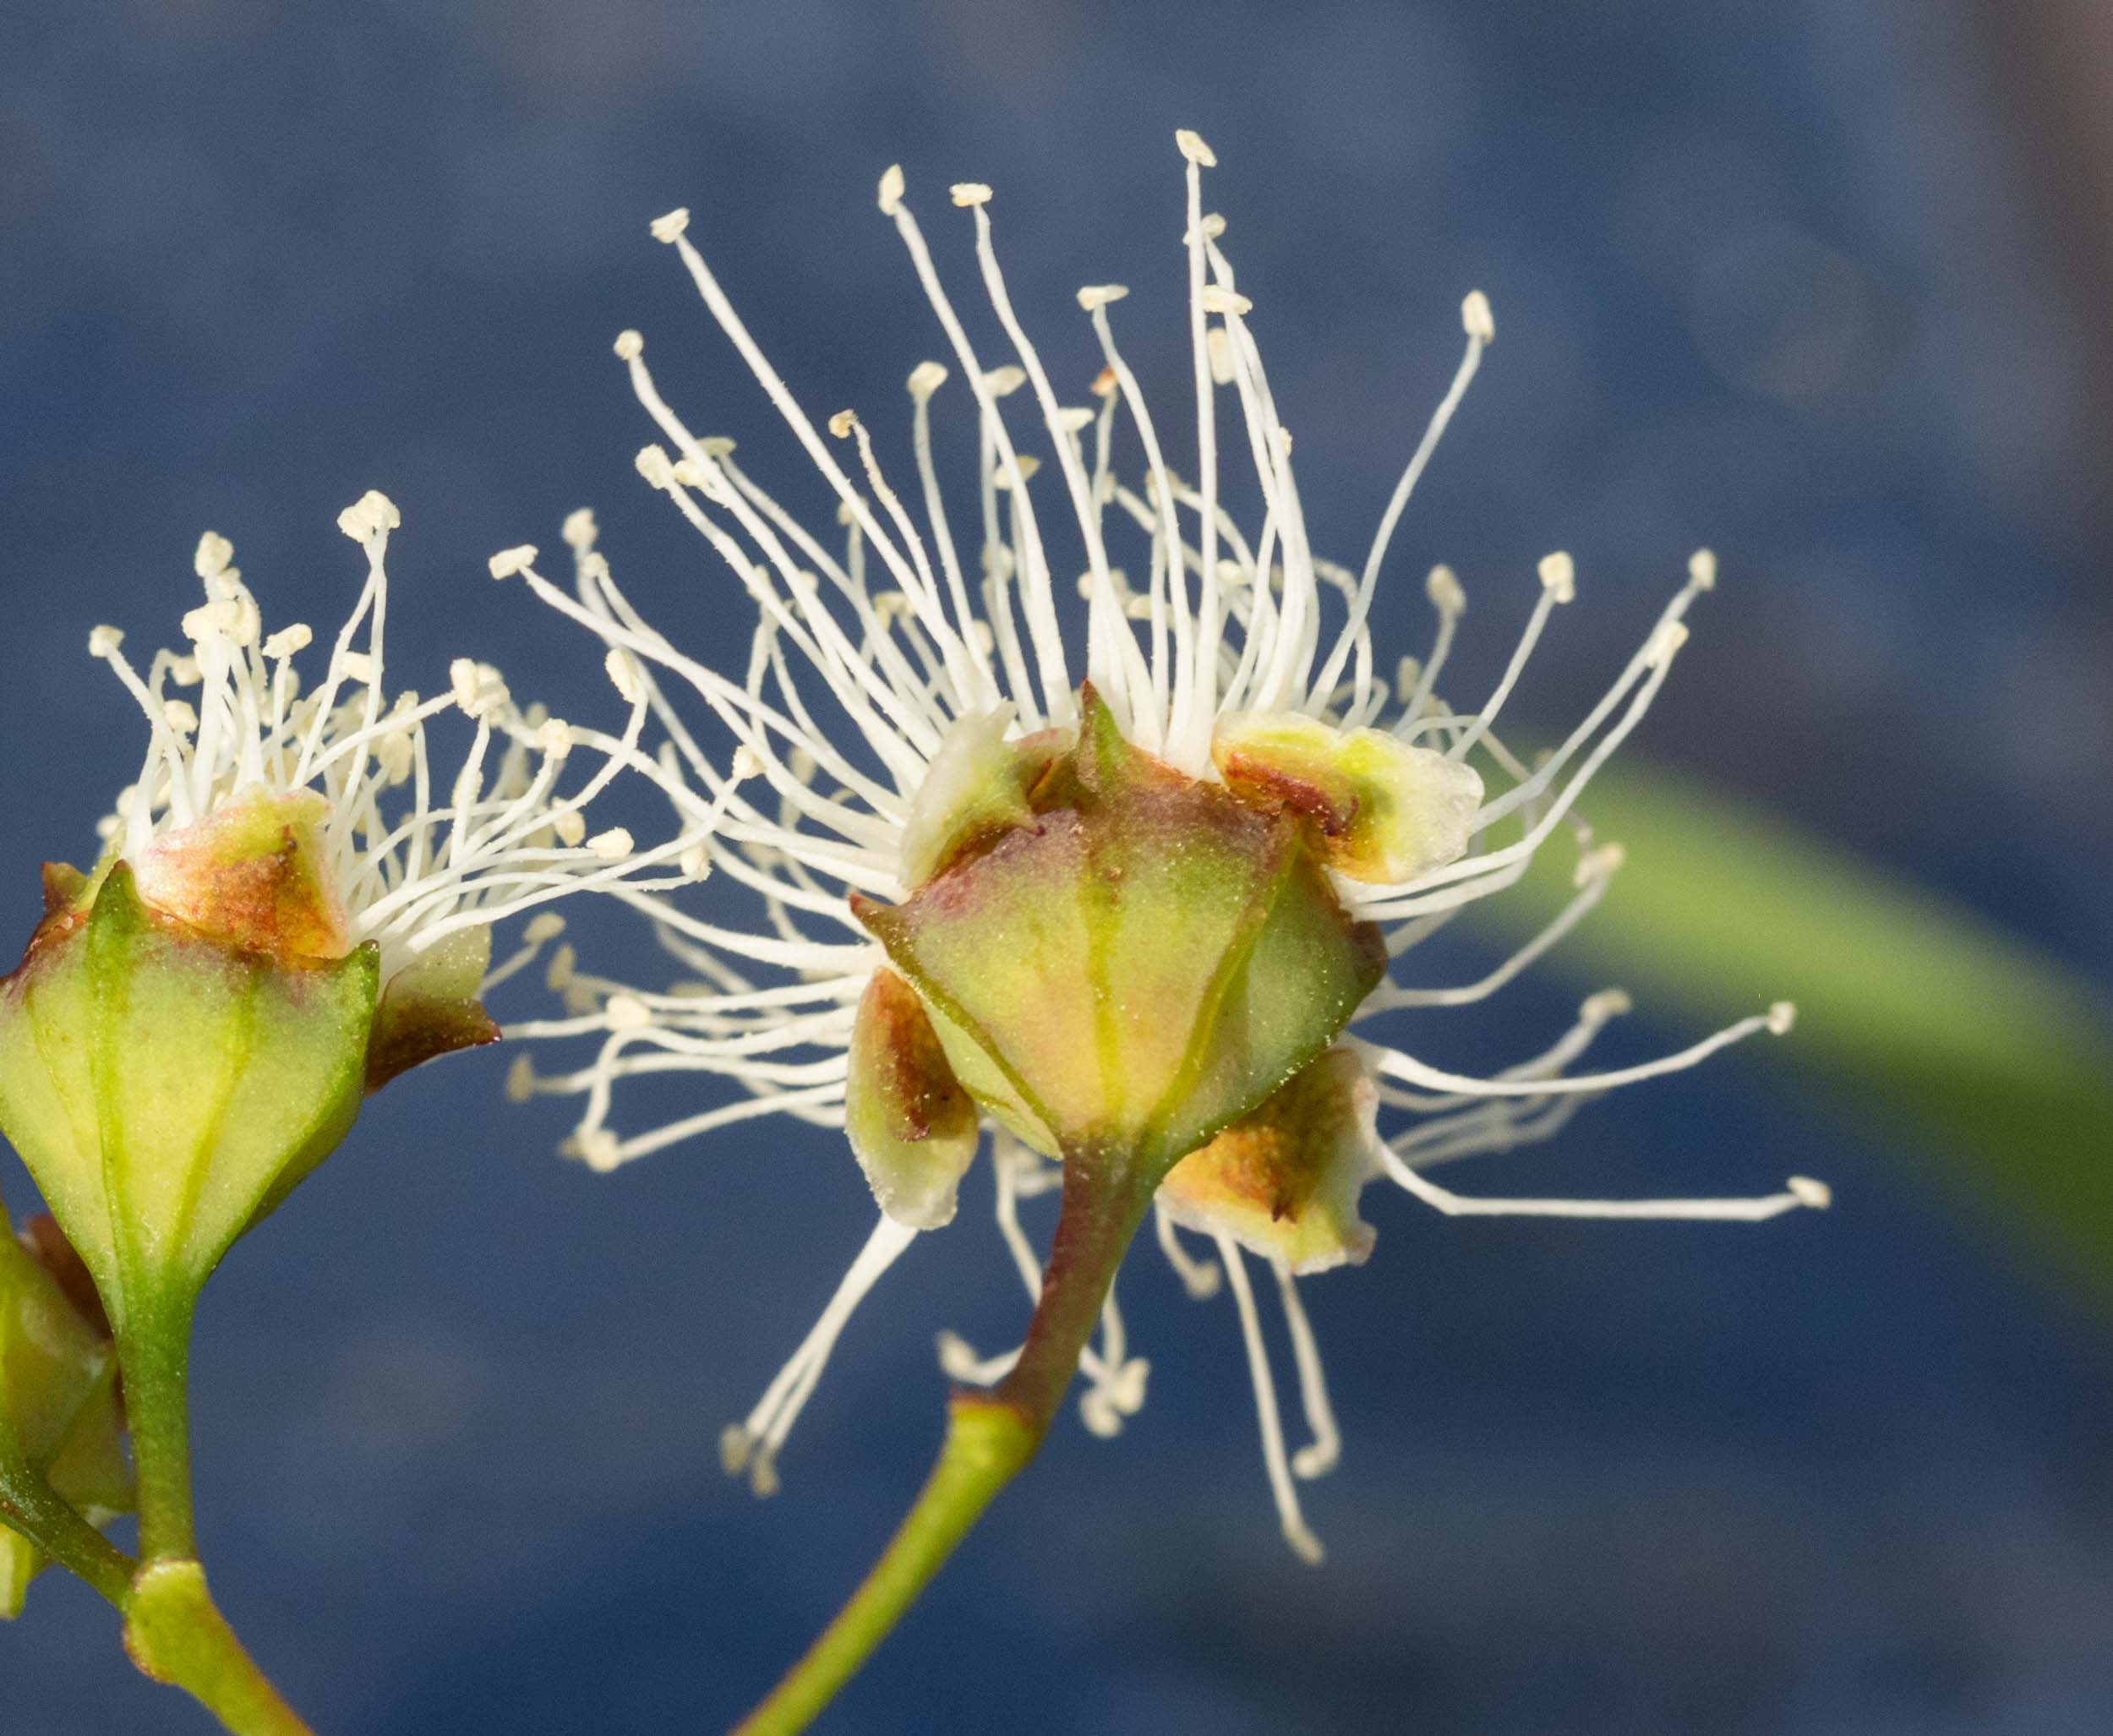   Angophora  flowers have petals (white above, greenish-brown beneath) and sepals (green triangular structures in between petals). 